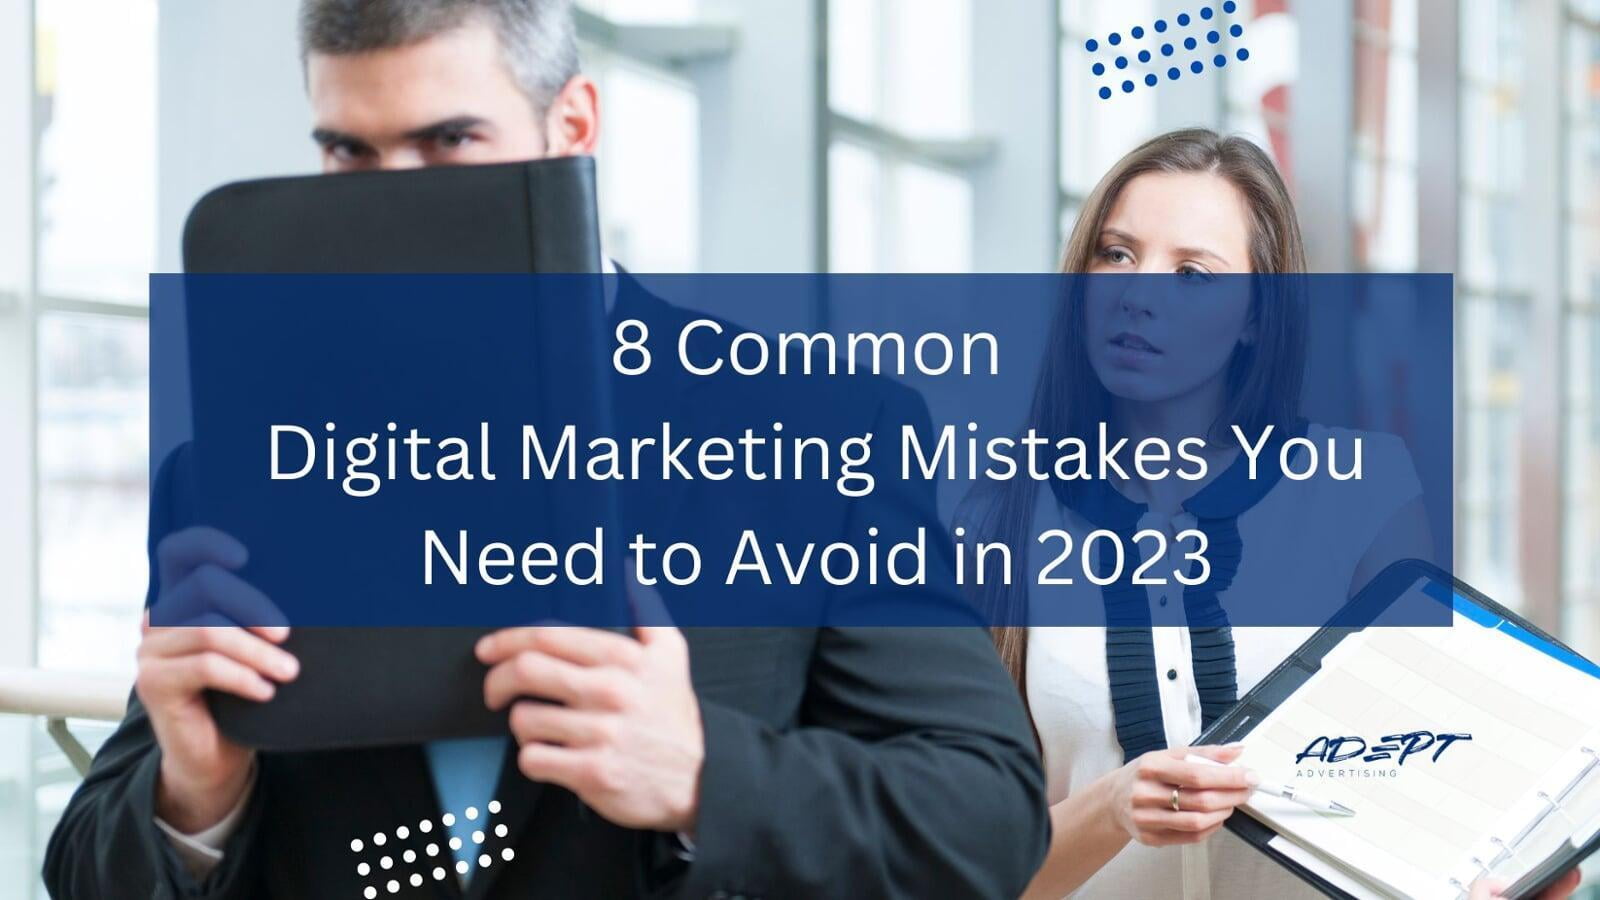 8 Common Digital Marketing Mistakes You Need to Avoid in 2023